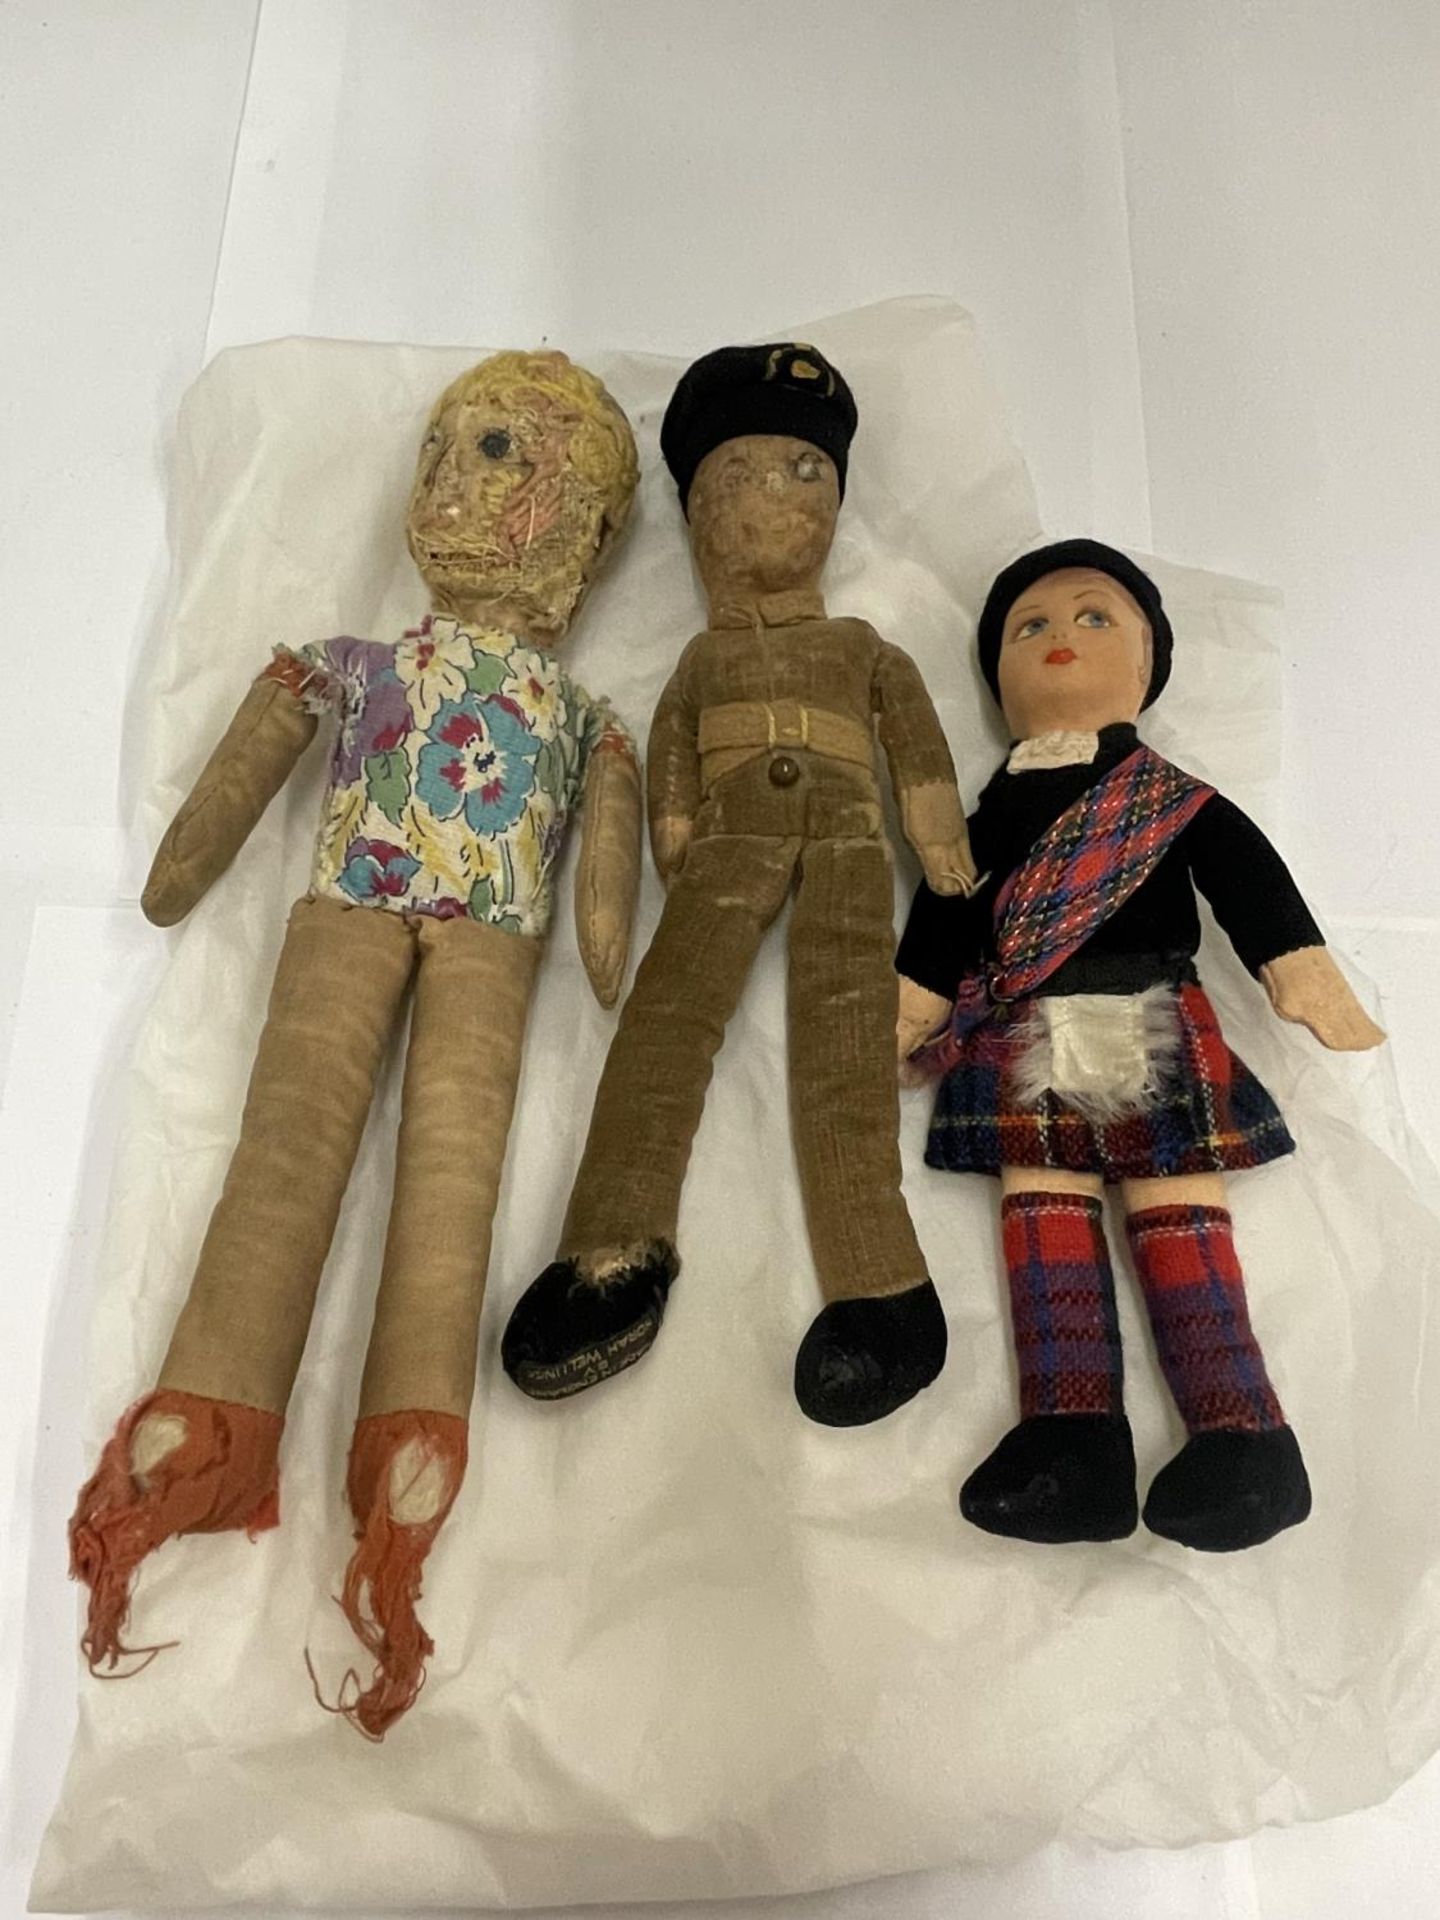 TWO VINTAGE NORAH WELLINGS DOLLS - A SCOTTISHMAN AND A SOLDIER WITH LABEL TO FEET PLUS ANOTHER NORAH